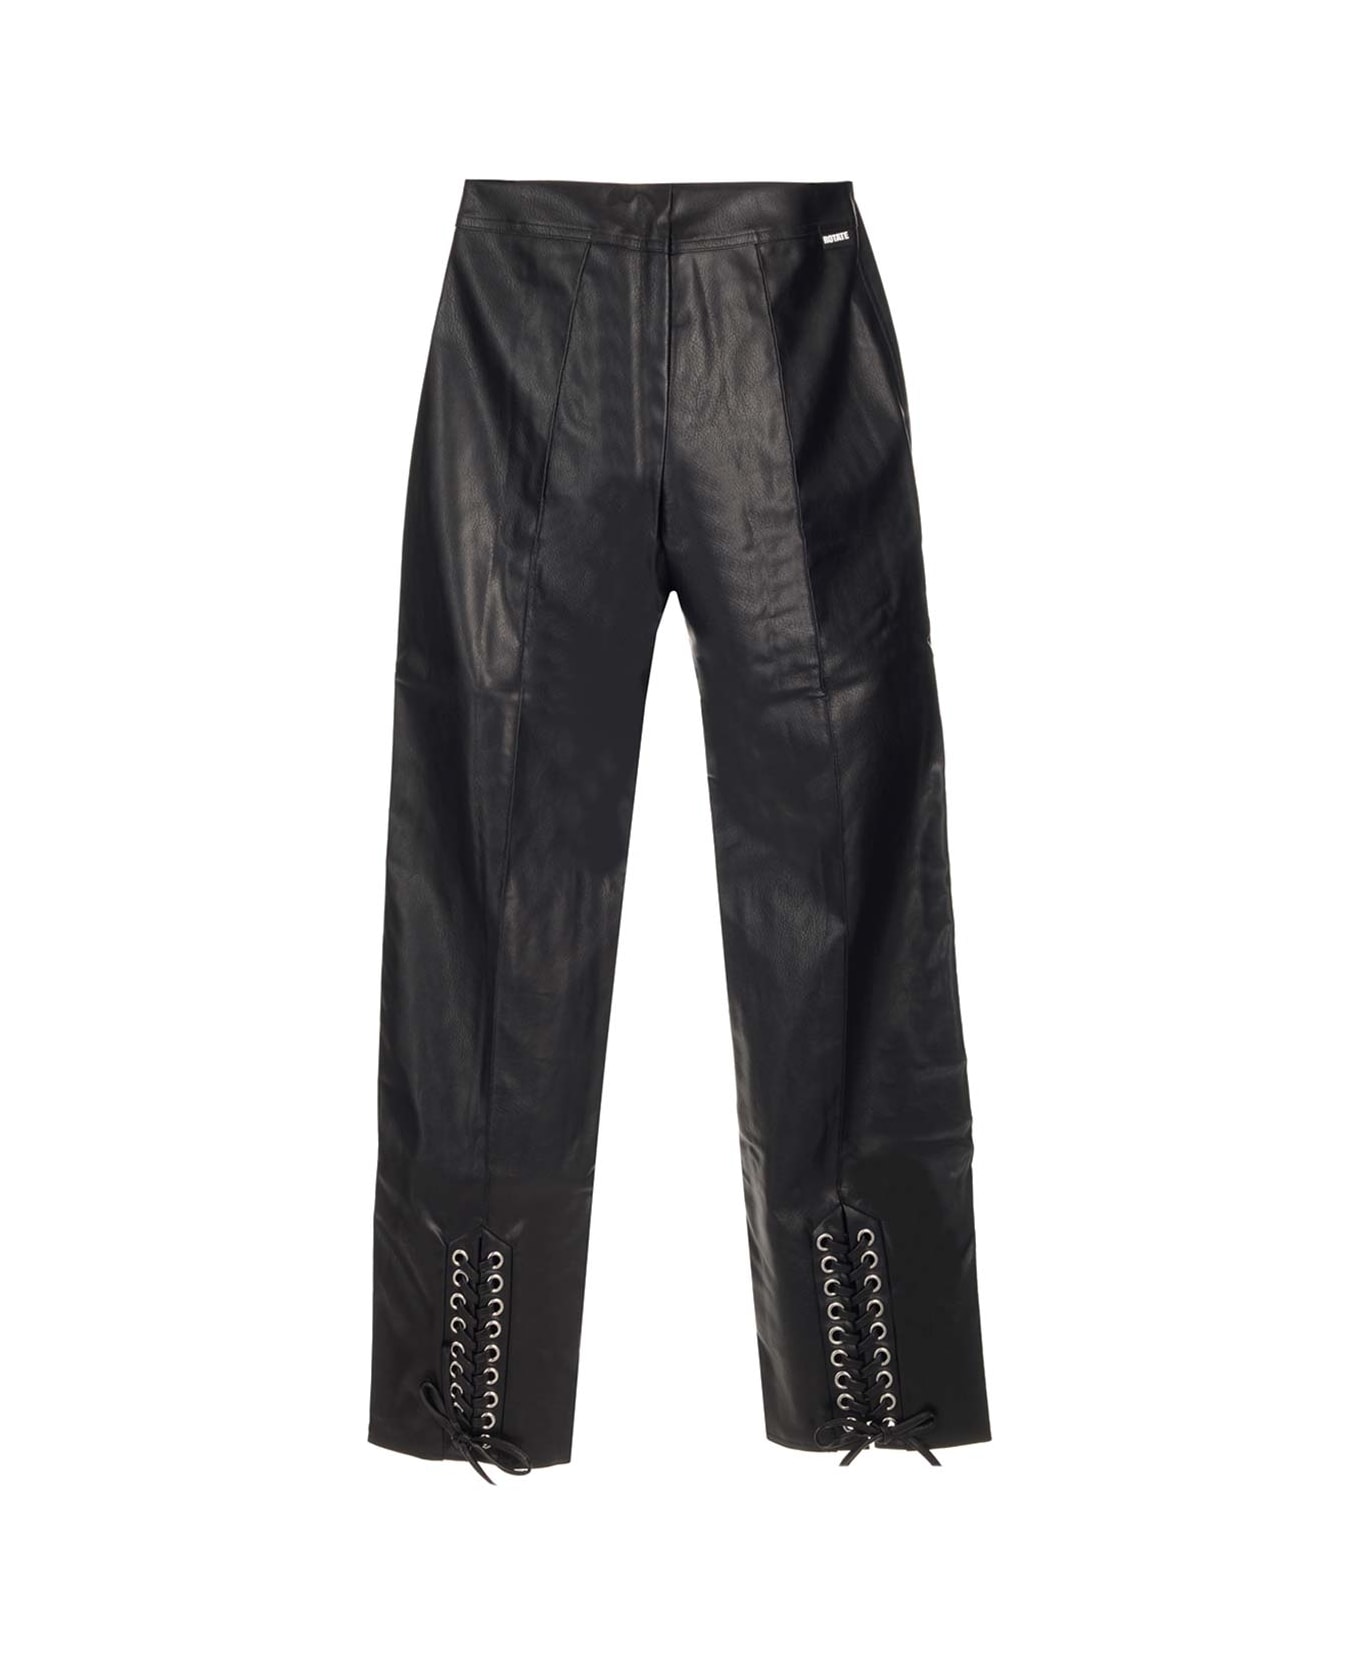 Rotate by Birger Christensen Leather Trousers - Black